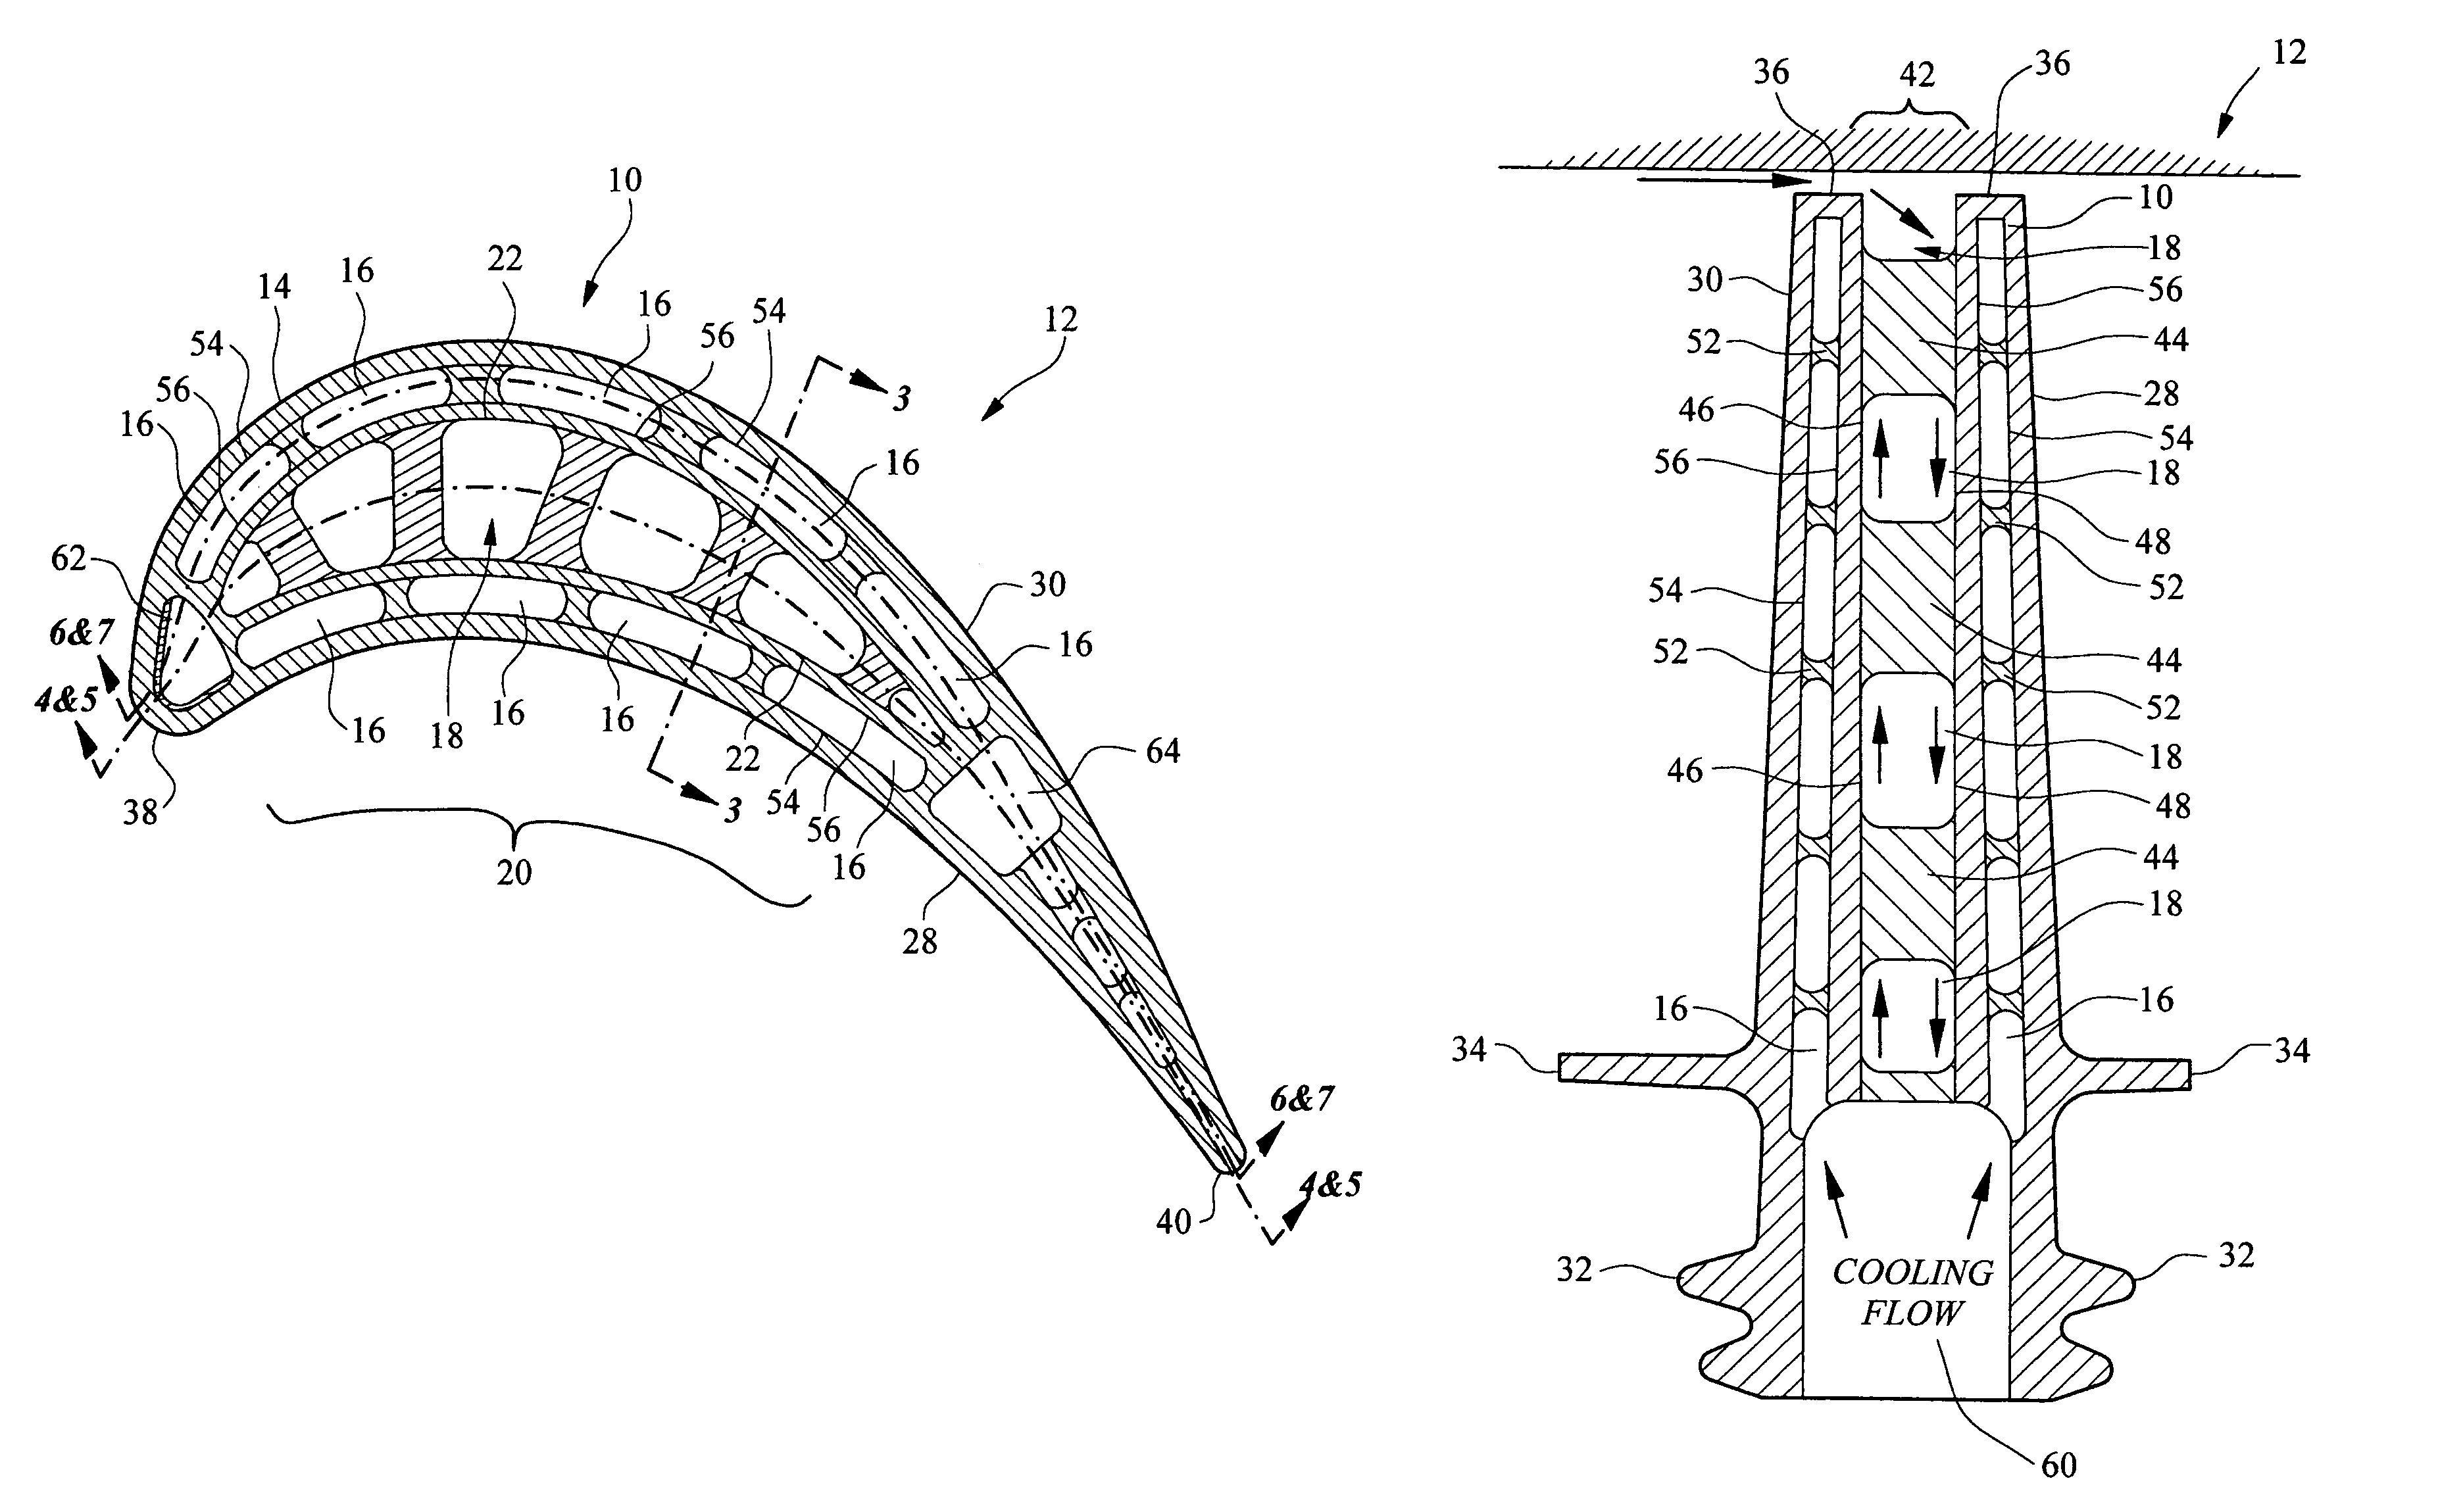 Turbine airfoil with outer wall cooling system and inner mid-chord hot gas receiving cavity